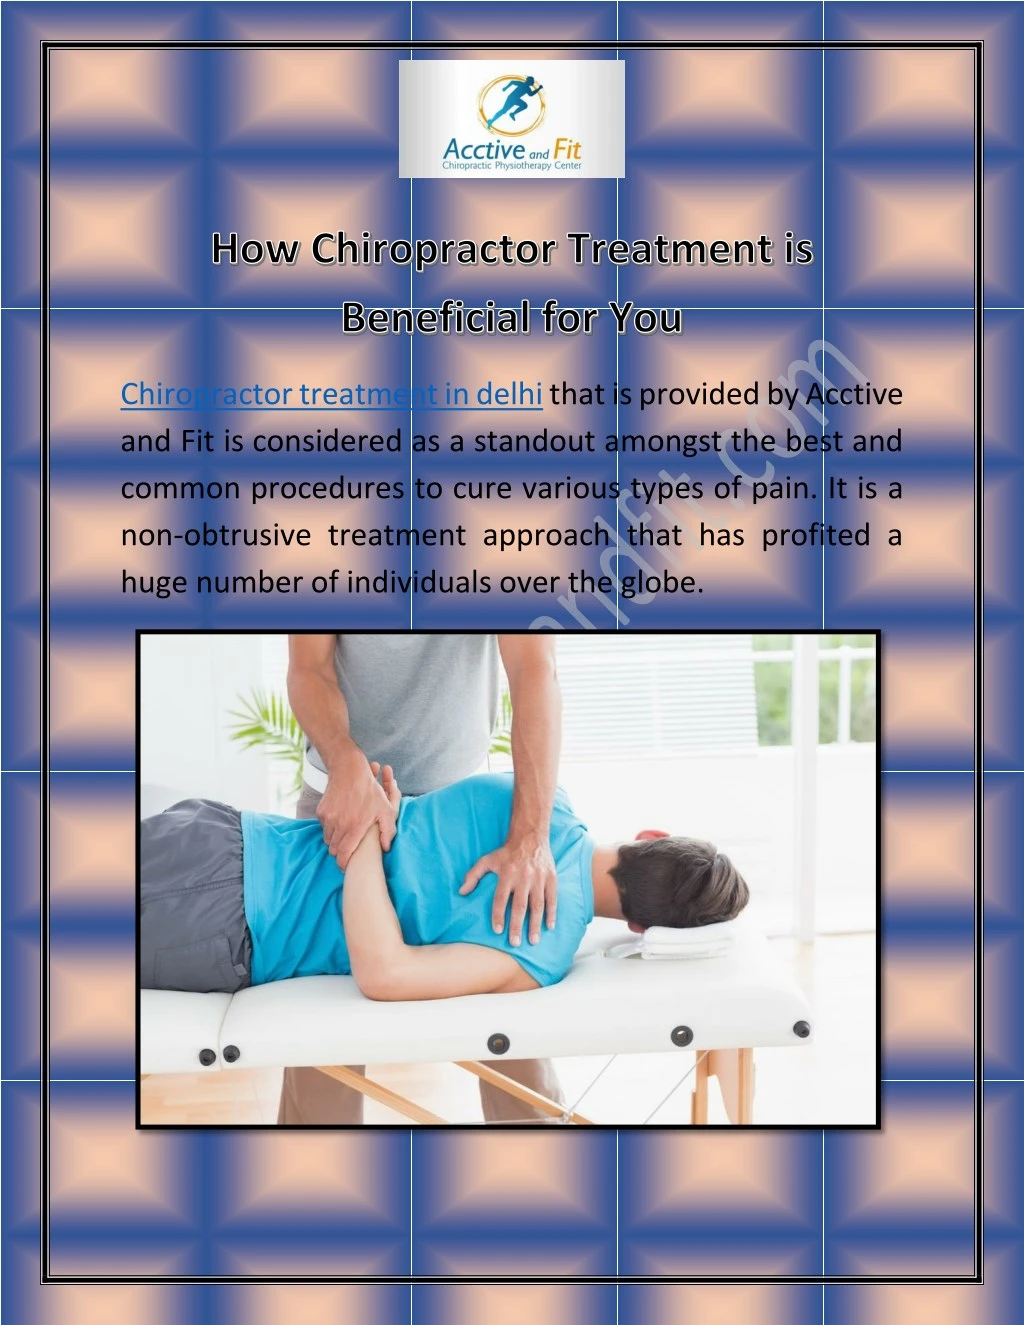 chiropractor treatment in delhi that is provided